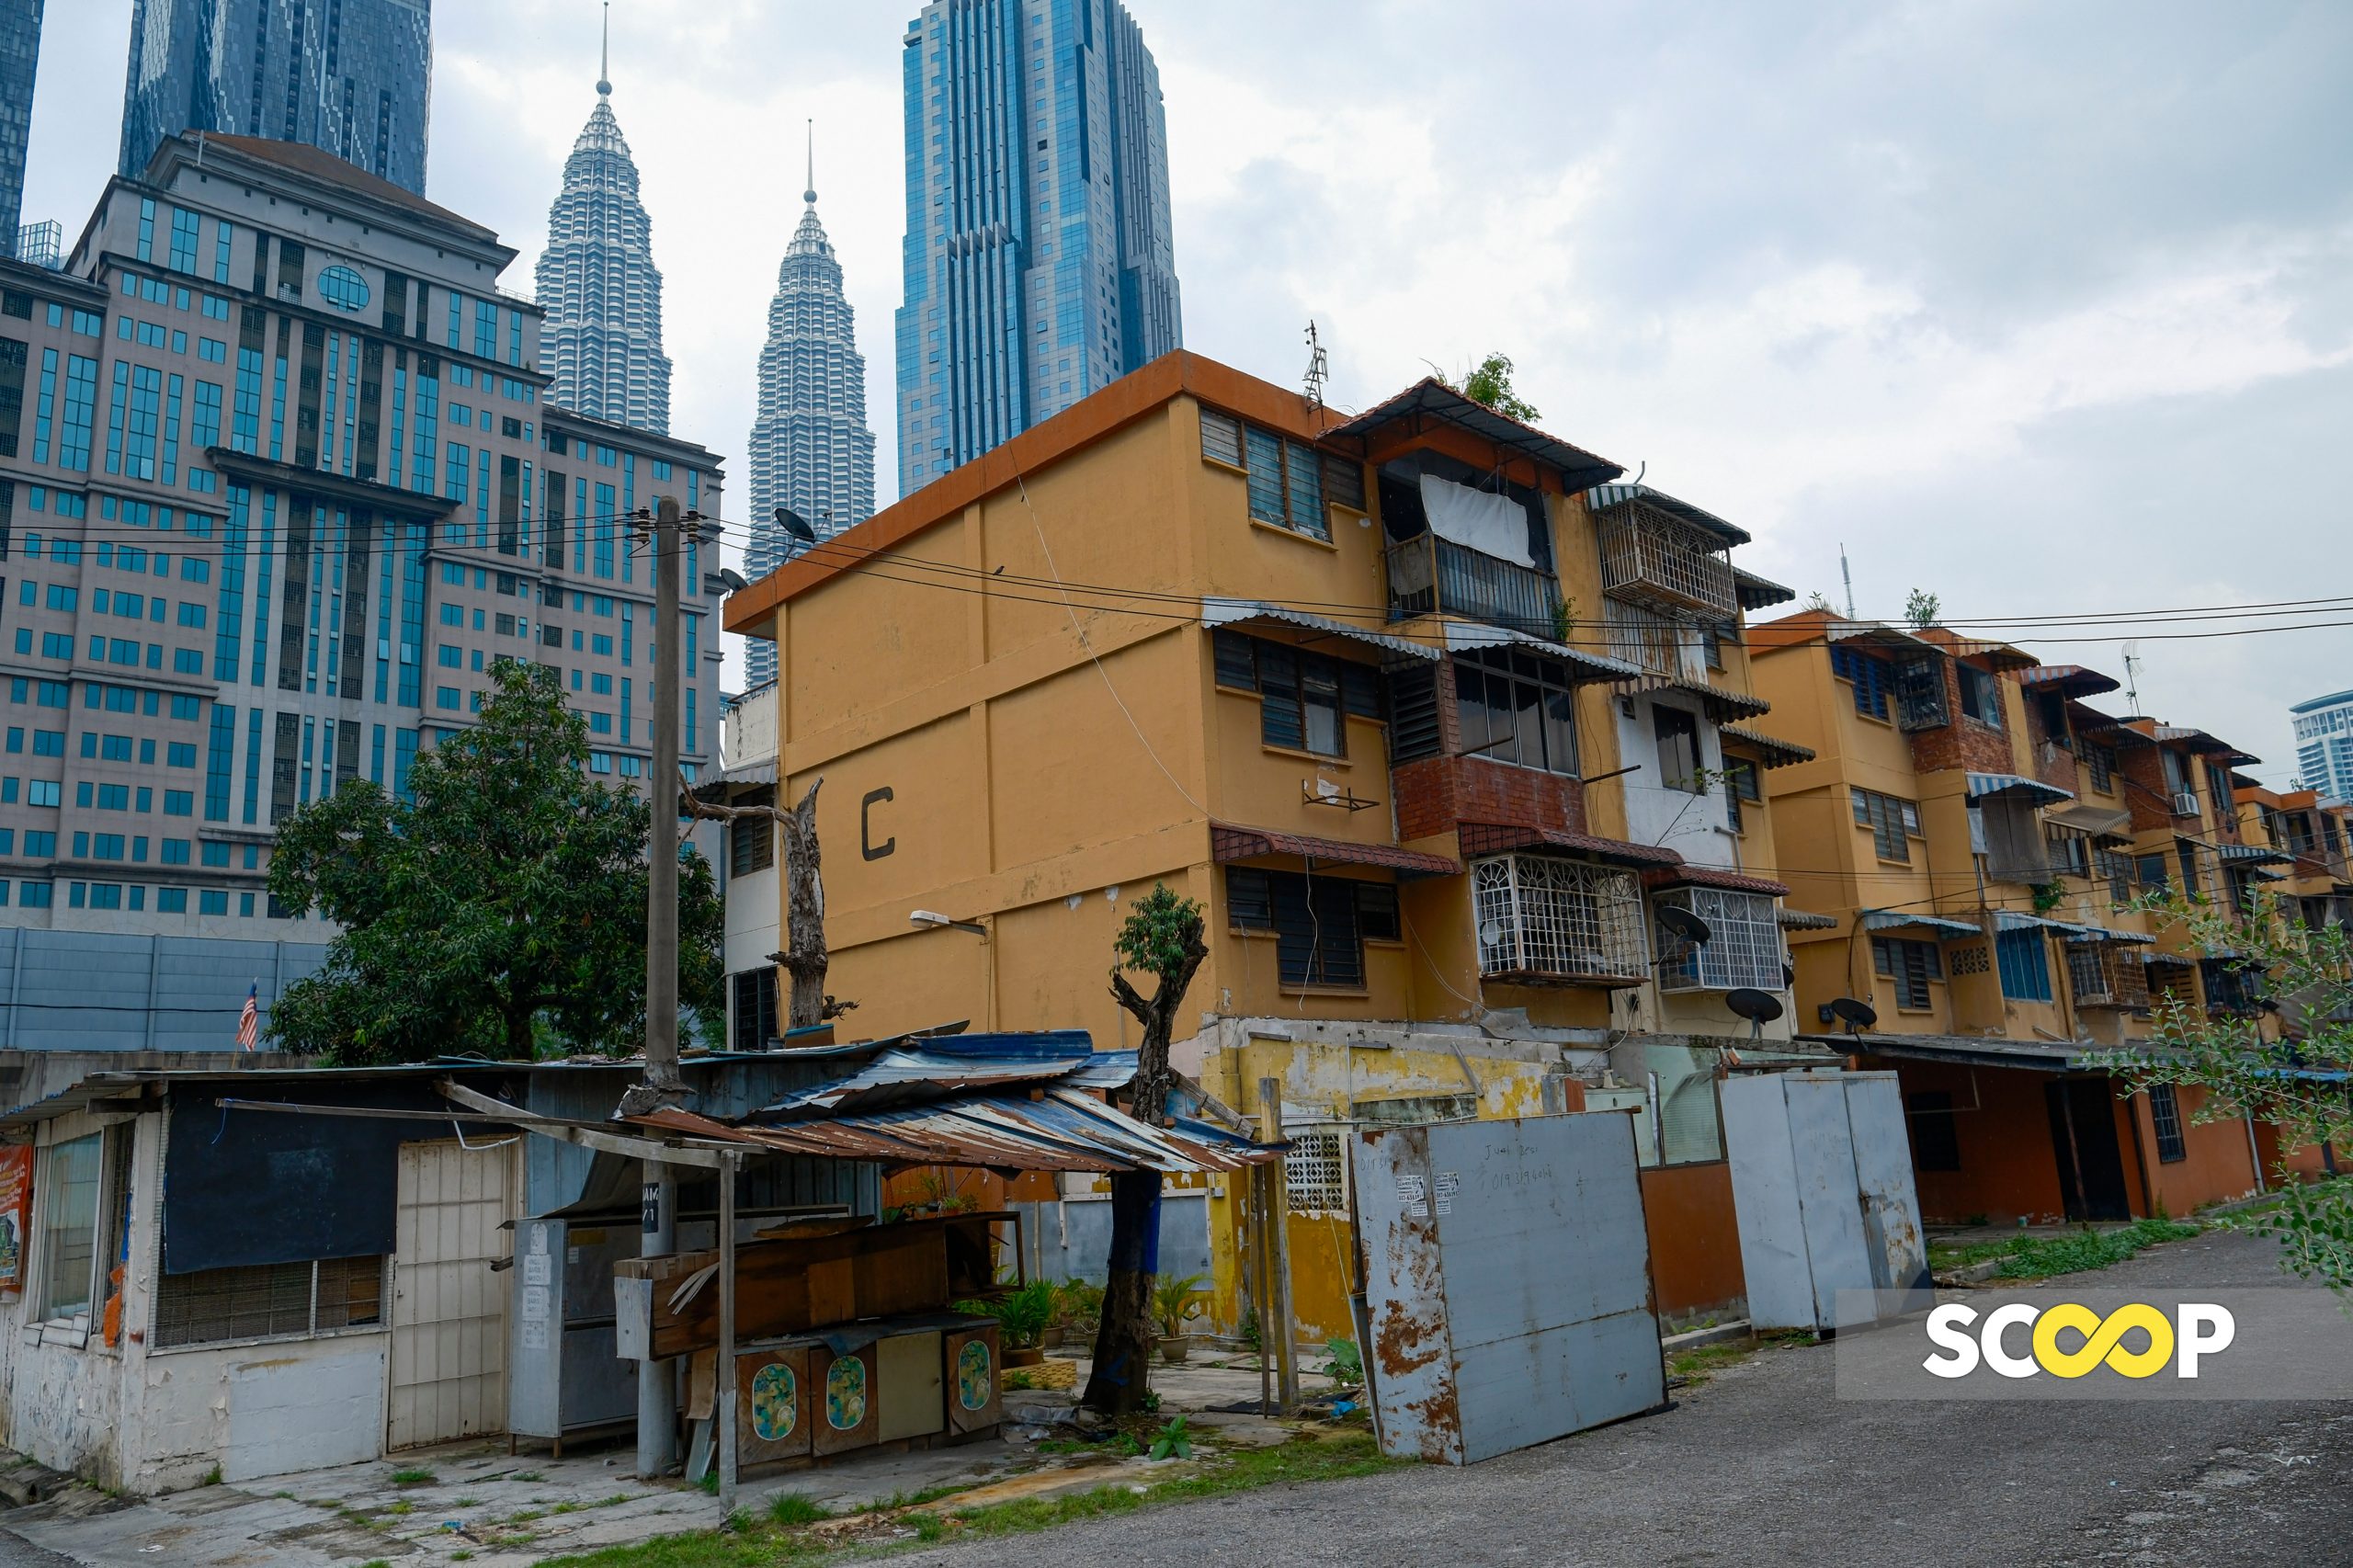 Kg Sg Baru residents temporarily spared from eviction, again